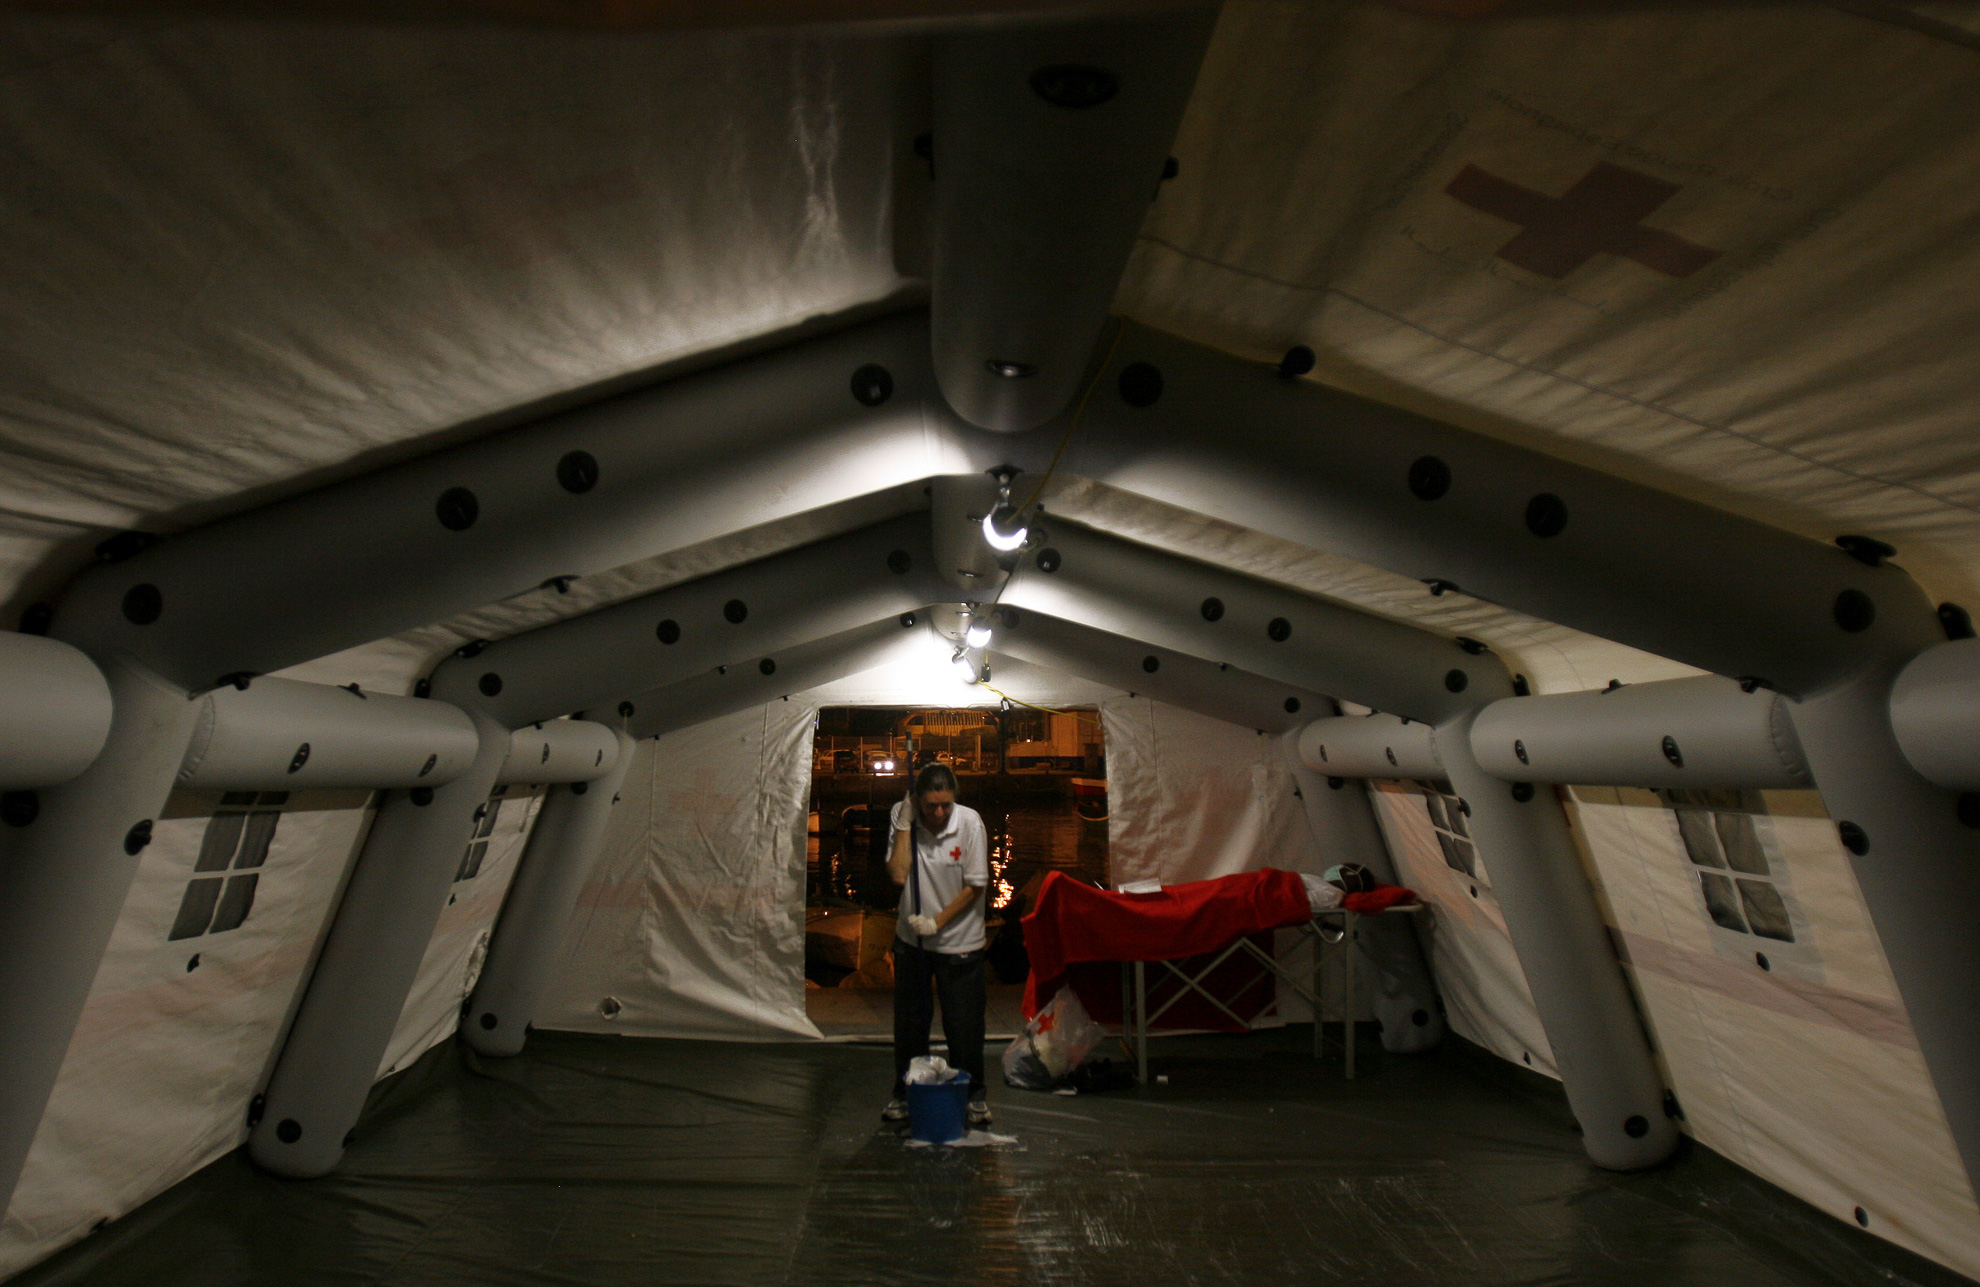 A Red Cross volunteer mops the floor of a tent where moments before a group of undocumented refugees arrived in dugout canoes at the port of Los Cristianos, Tenerife. One of them, weak from the trip, waits in a stretcher for the ambulance that will take him to the hospital. 17 August 2006.